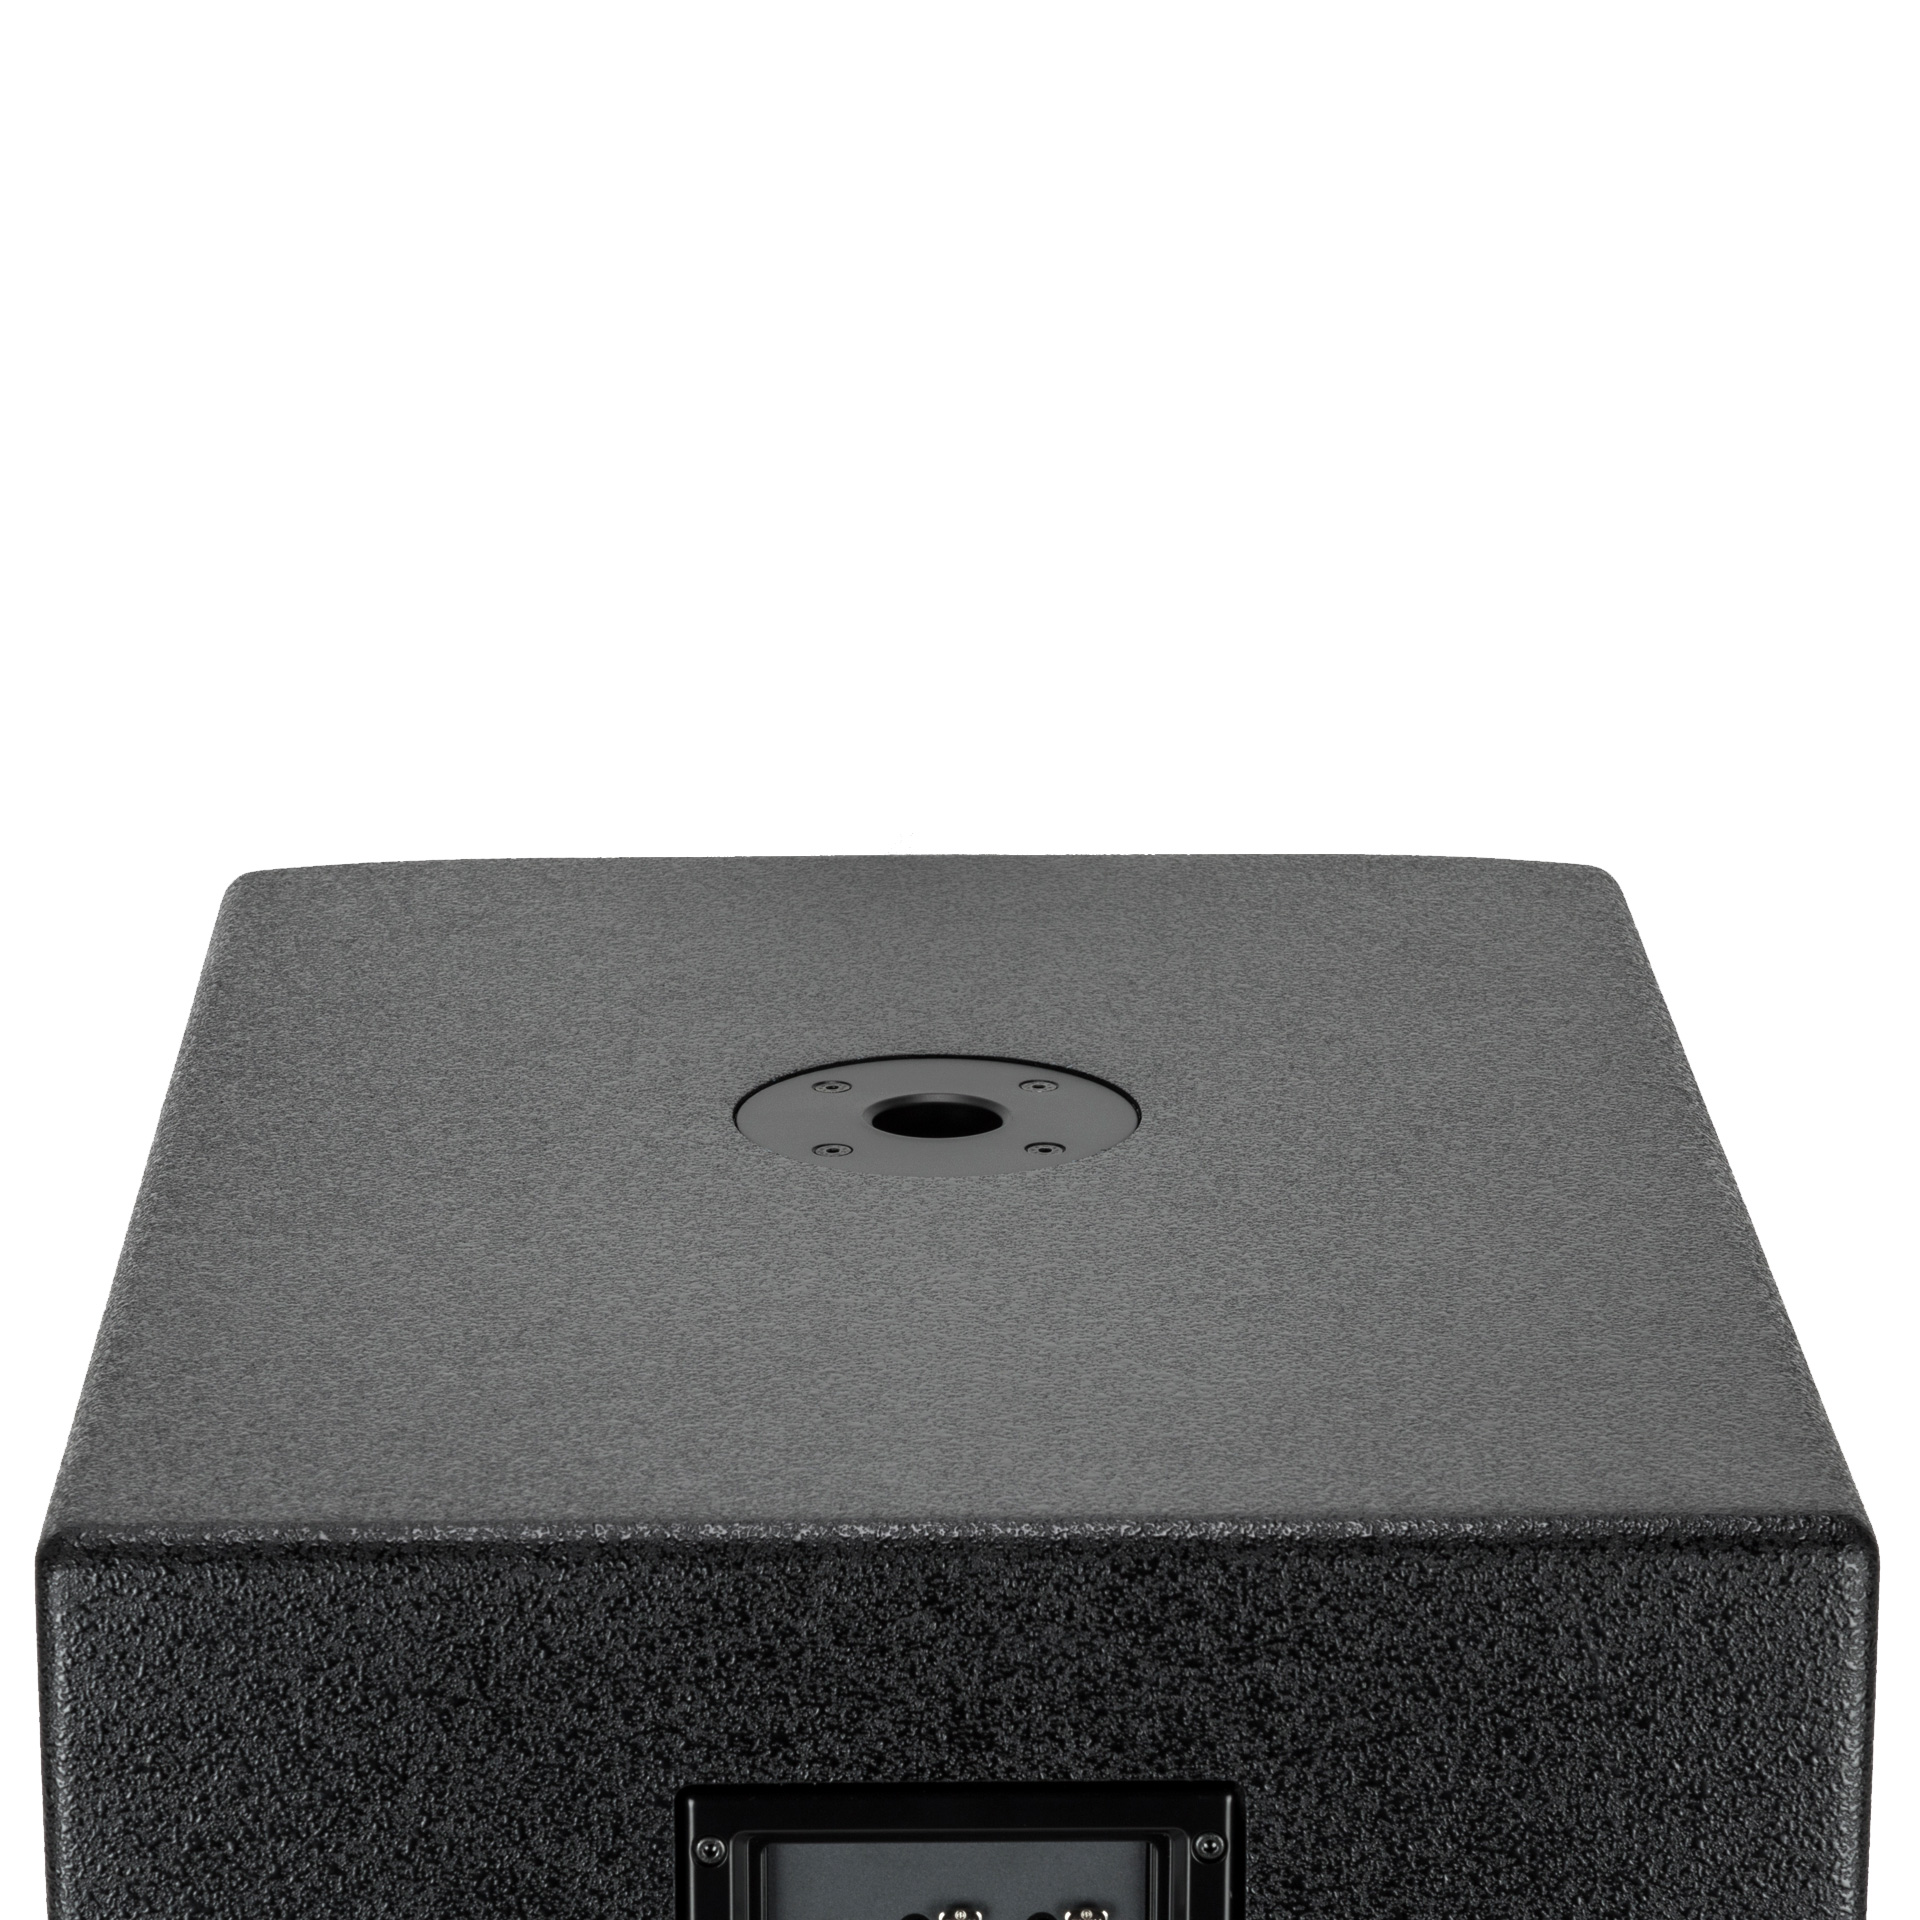 Rcf Sub 705-as Ii - Active subwoofer - Variation 3